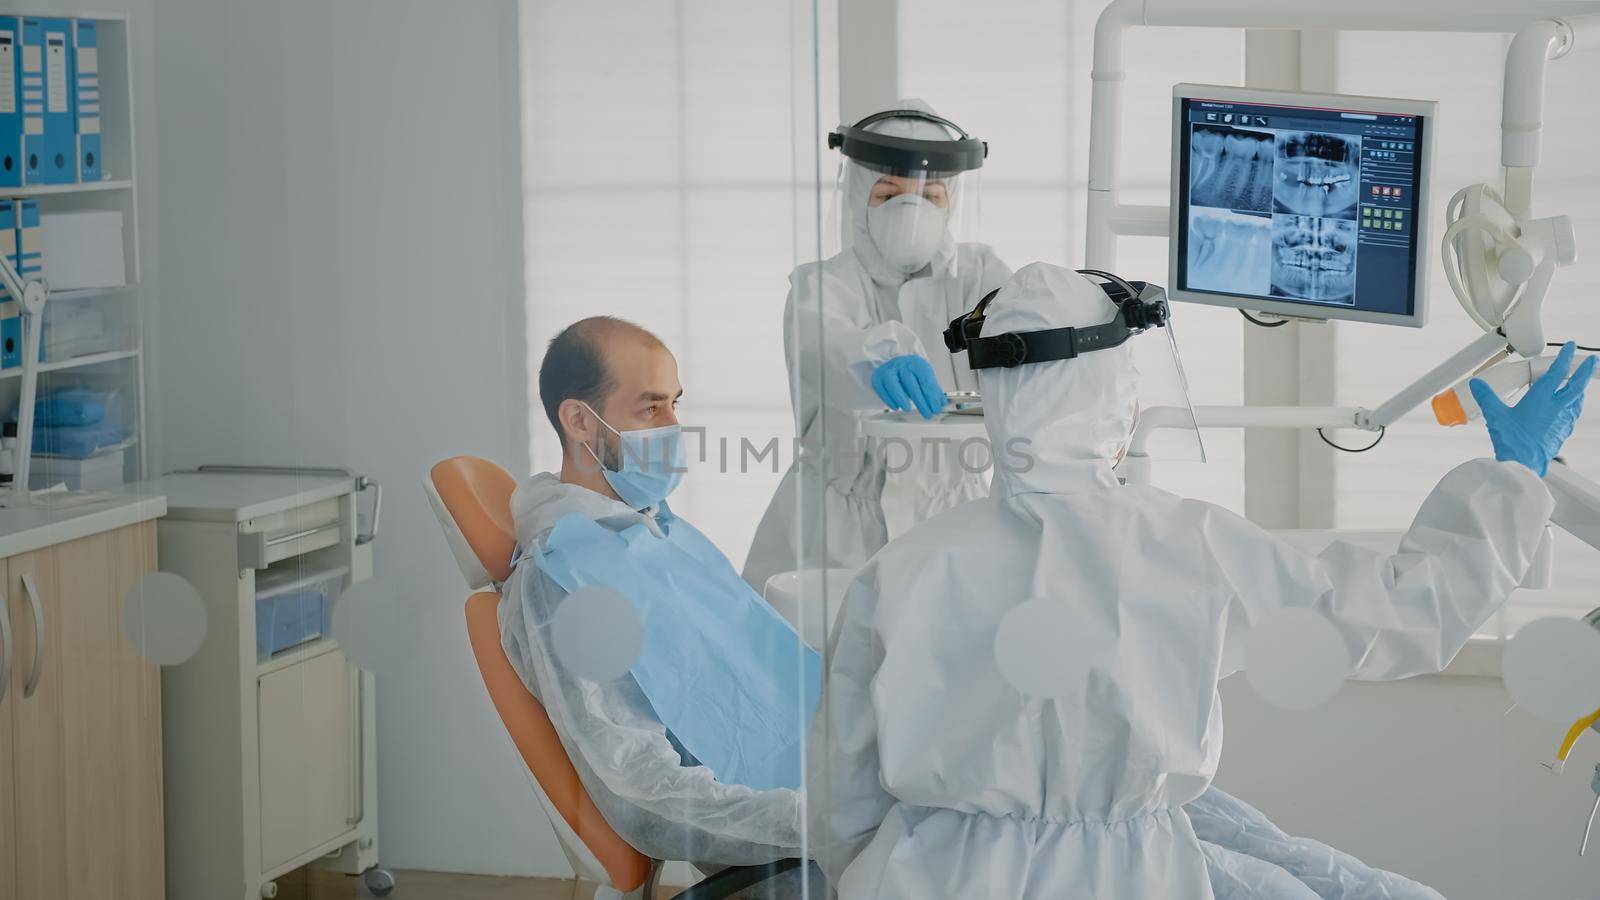 Dentistry staff wearing ppe suits doing teethcare consultation on patient, using dental equipment in stomatology cabinet. Dentist and specialist working on oral examination at clinic.